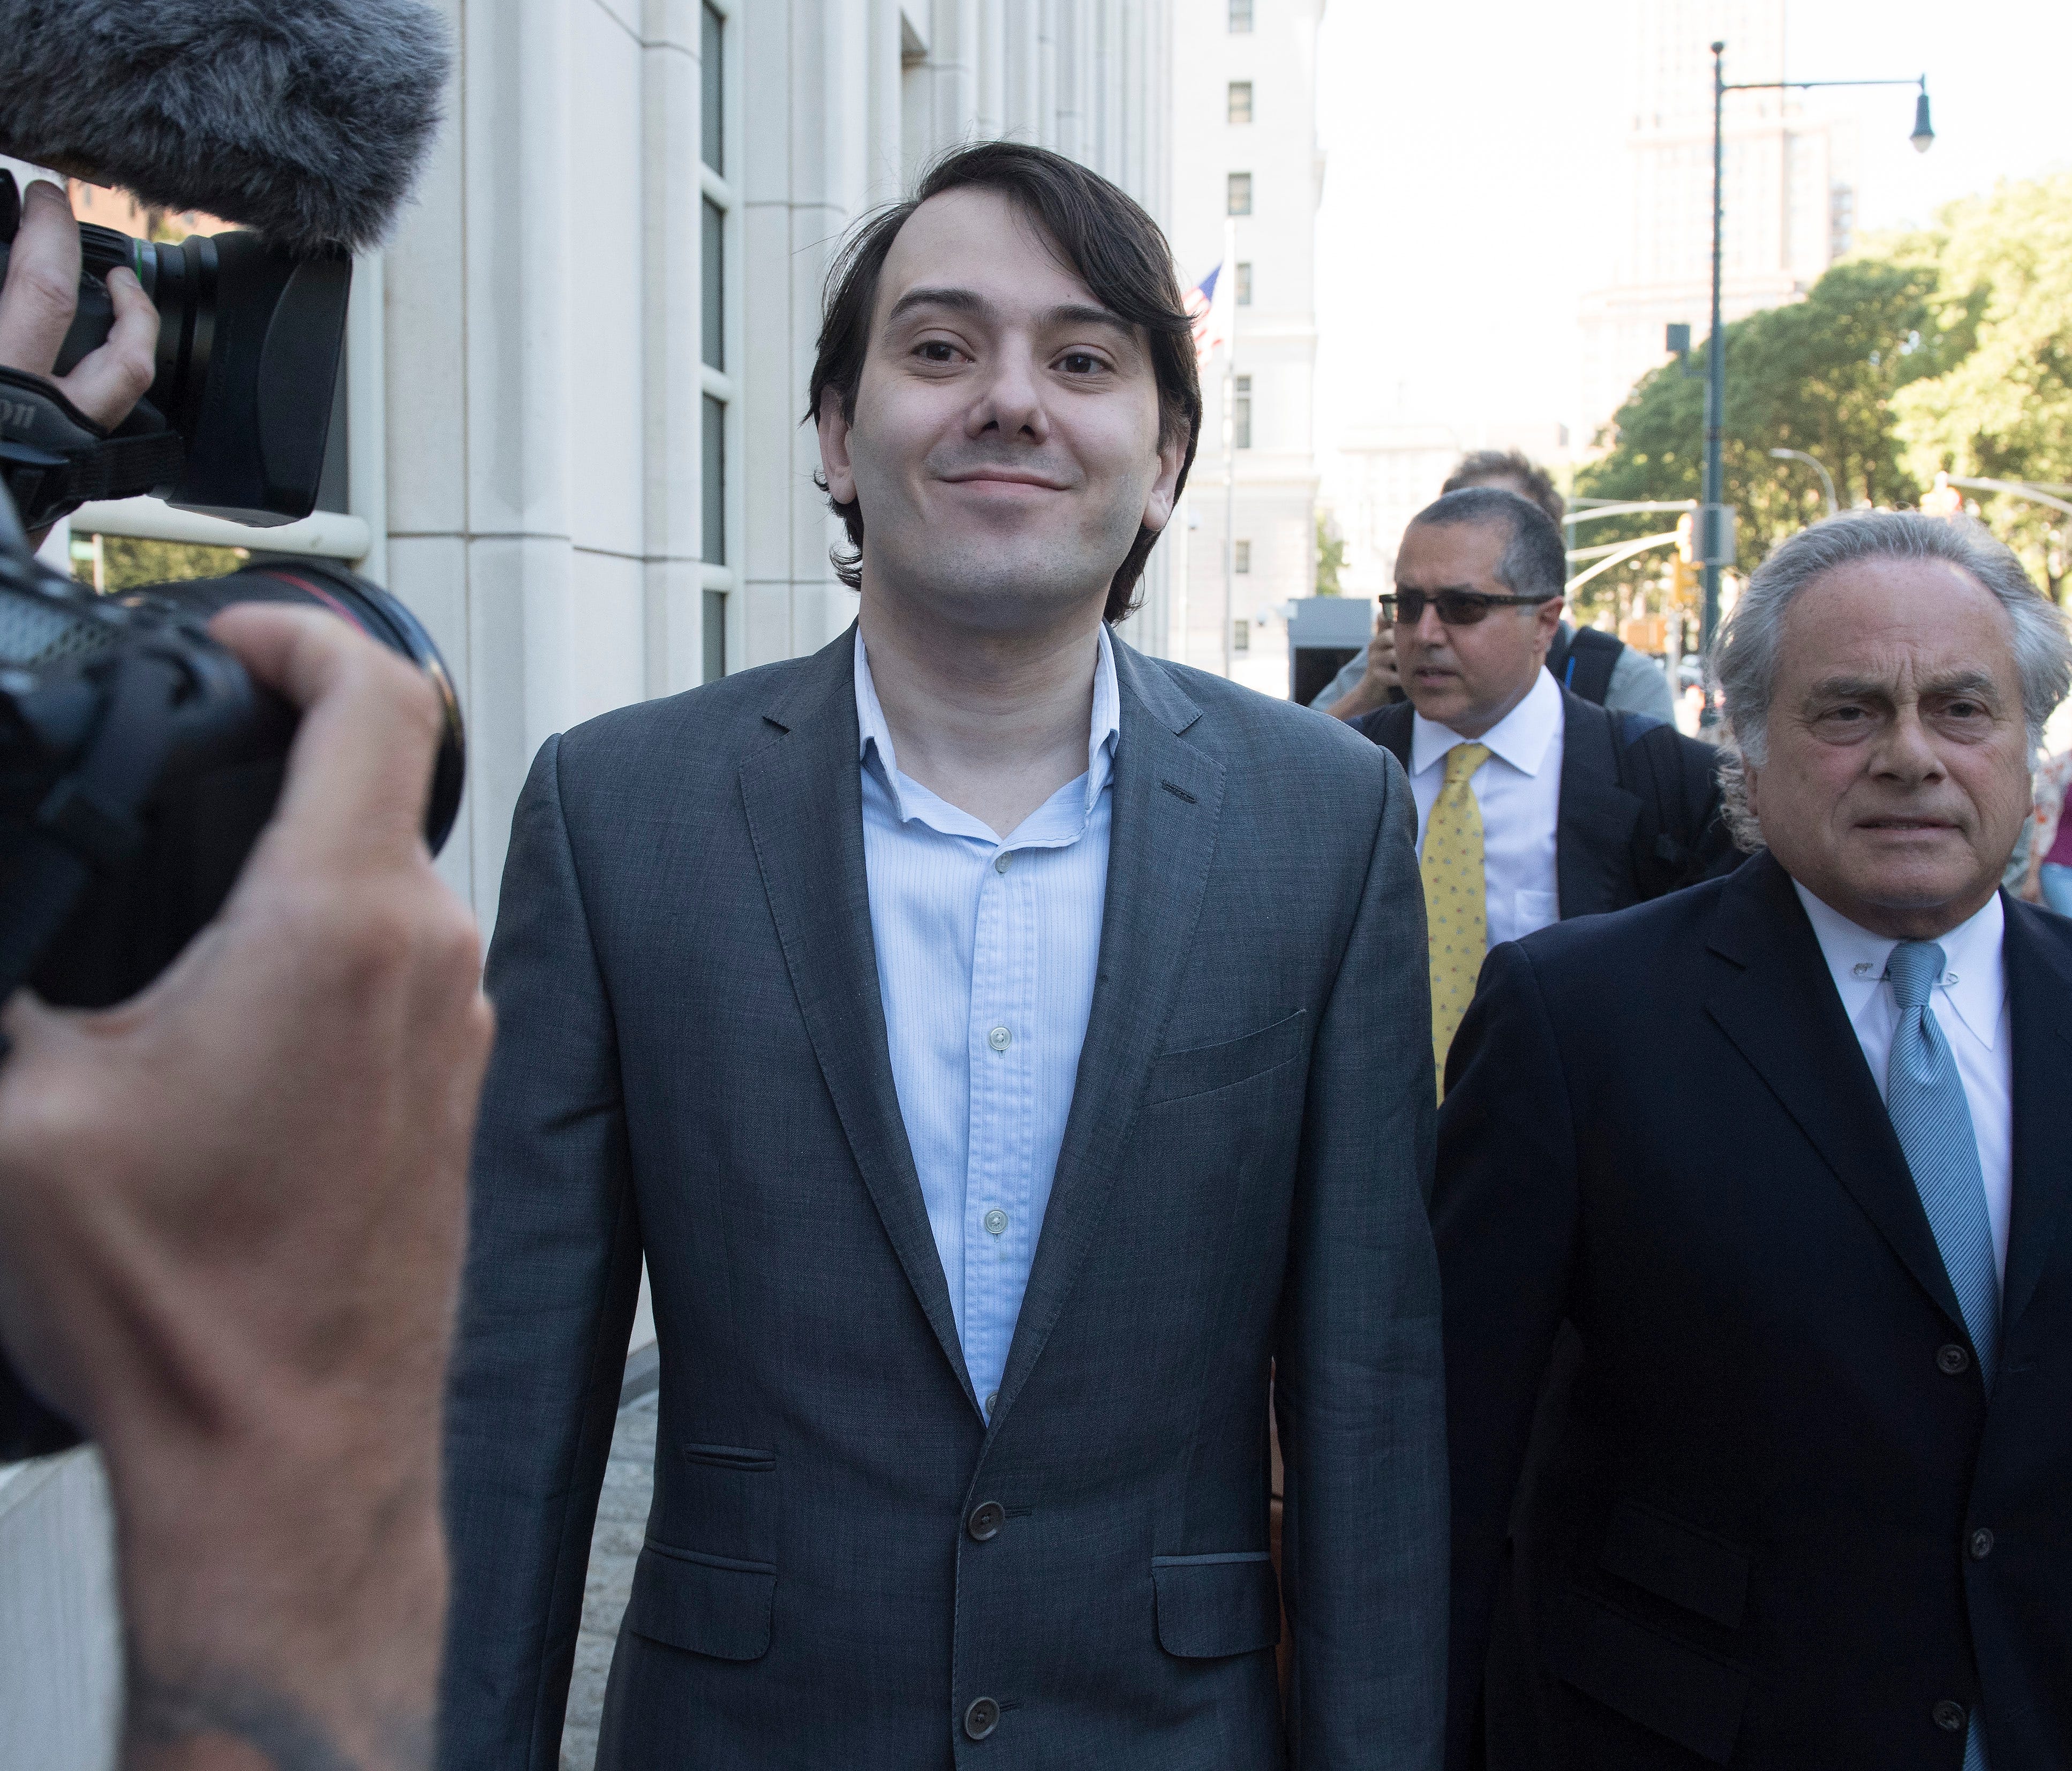 File photo taken in June 2017 shows Martin Shkreli arriving at Brooklyn federal Court in New York City with attorney Benjamin Brafman for jury selection in the pharmaceutical industry entrepreneur's fraud trial.